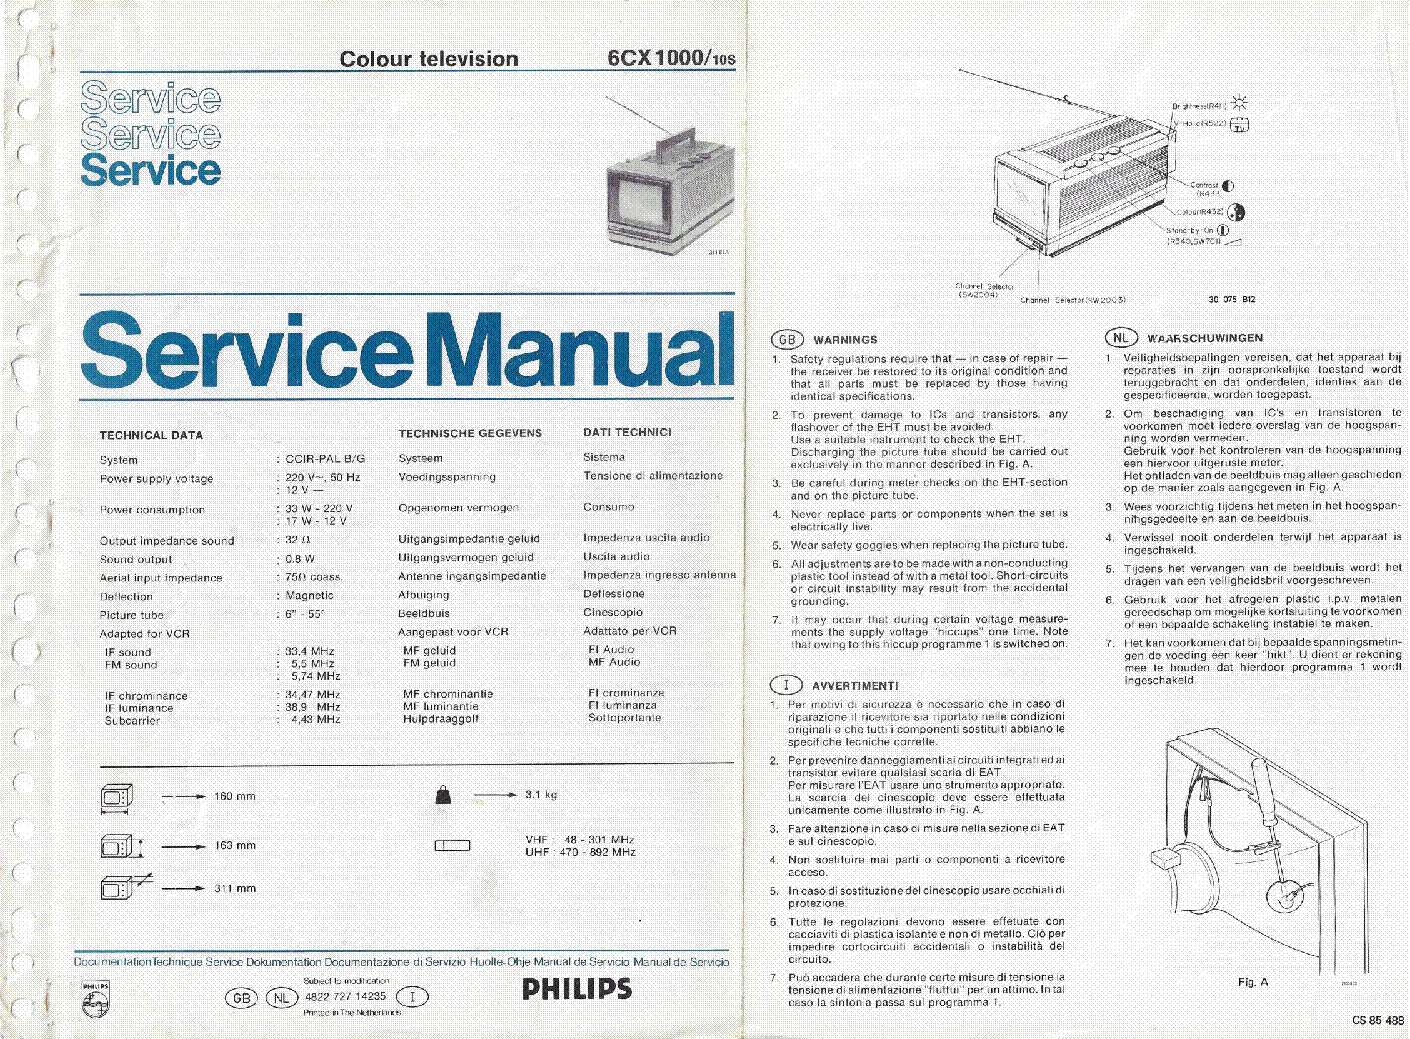 PHILIPS 6CX1000 SM service manual (1st page)